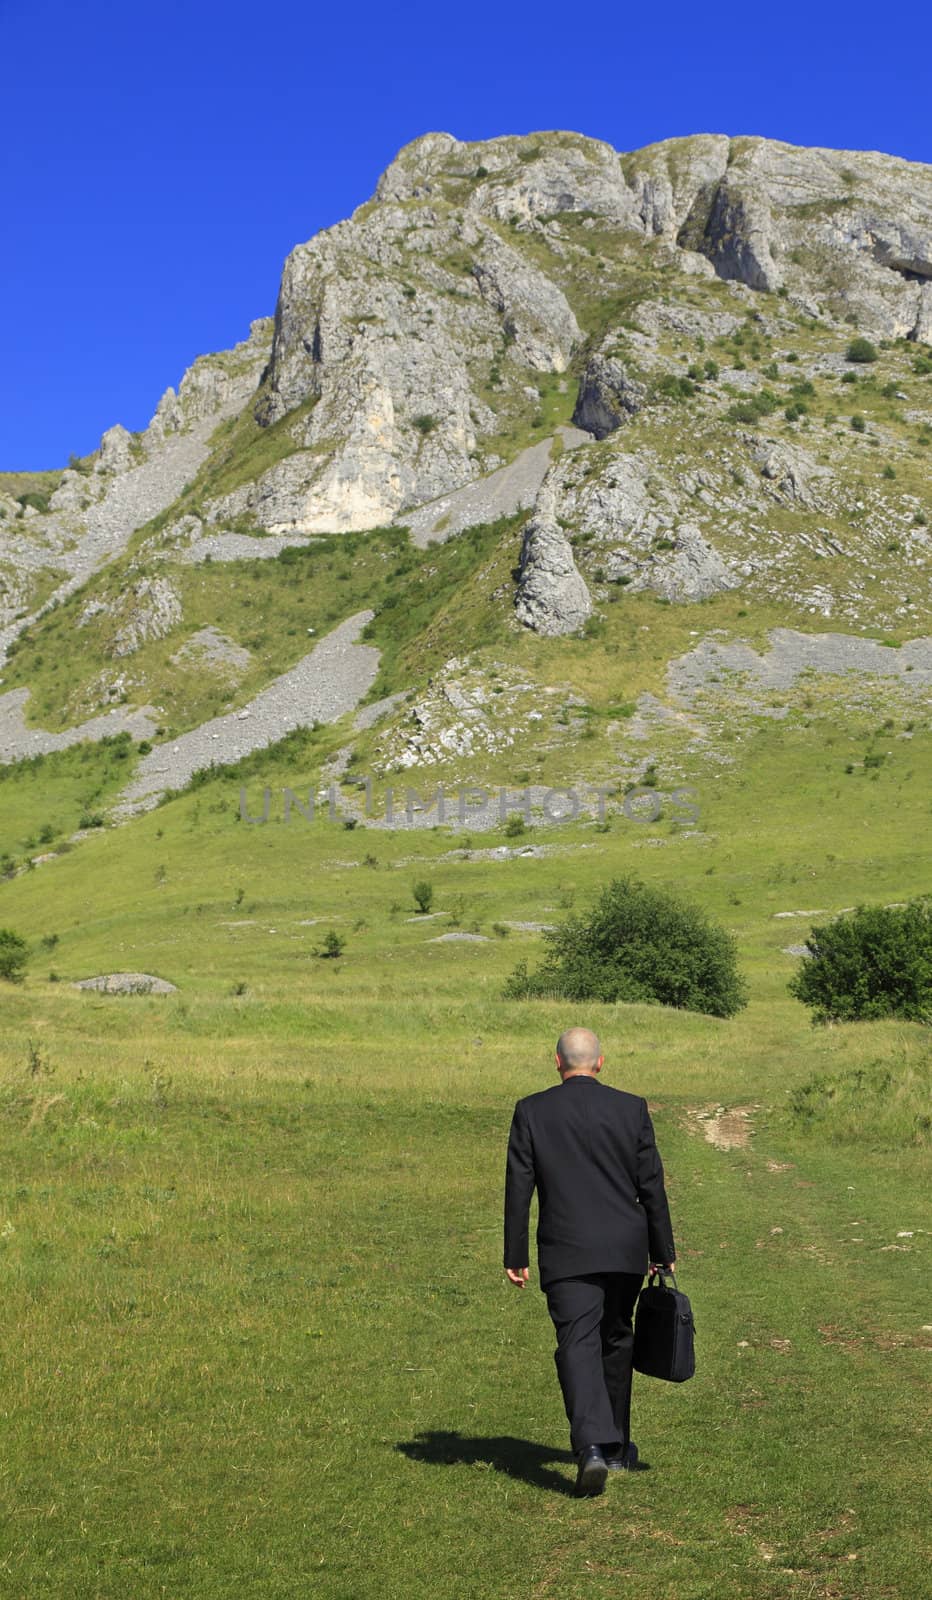 Businessman oudoors walking through a big mountain.The main focus is on the rocks,the man is slighty out of focus.